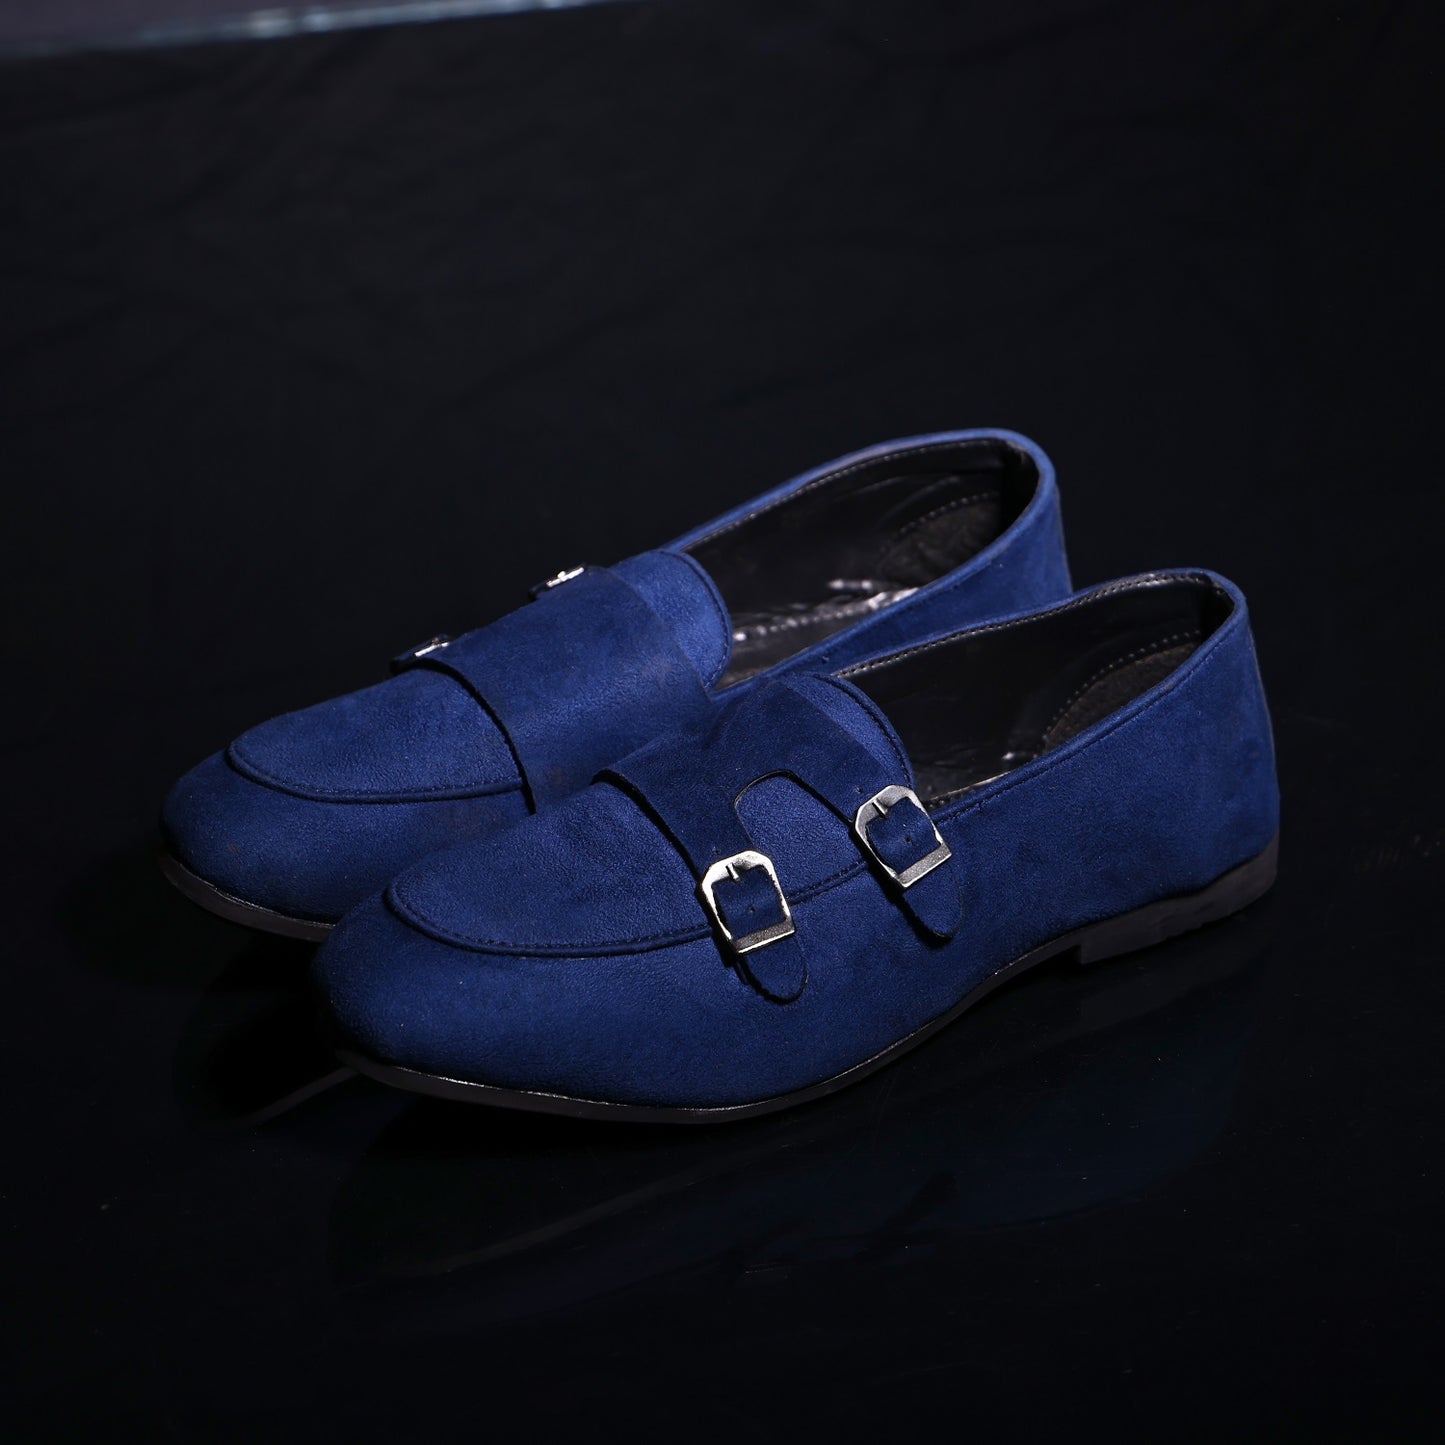 The Aurous Urbane Slip On Loafers